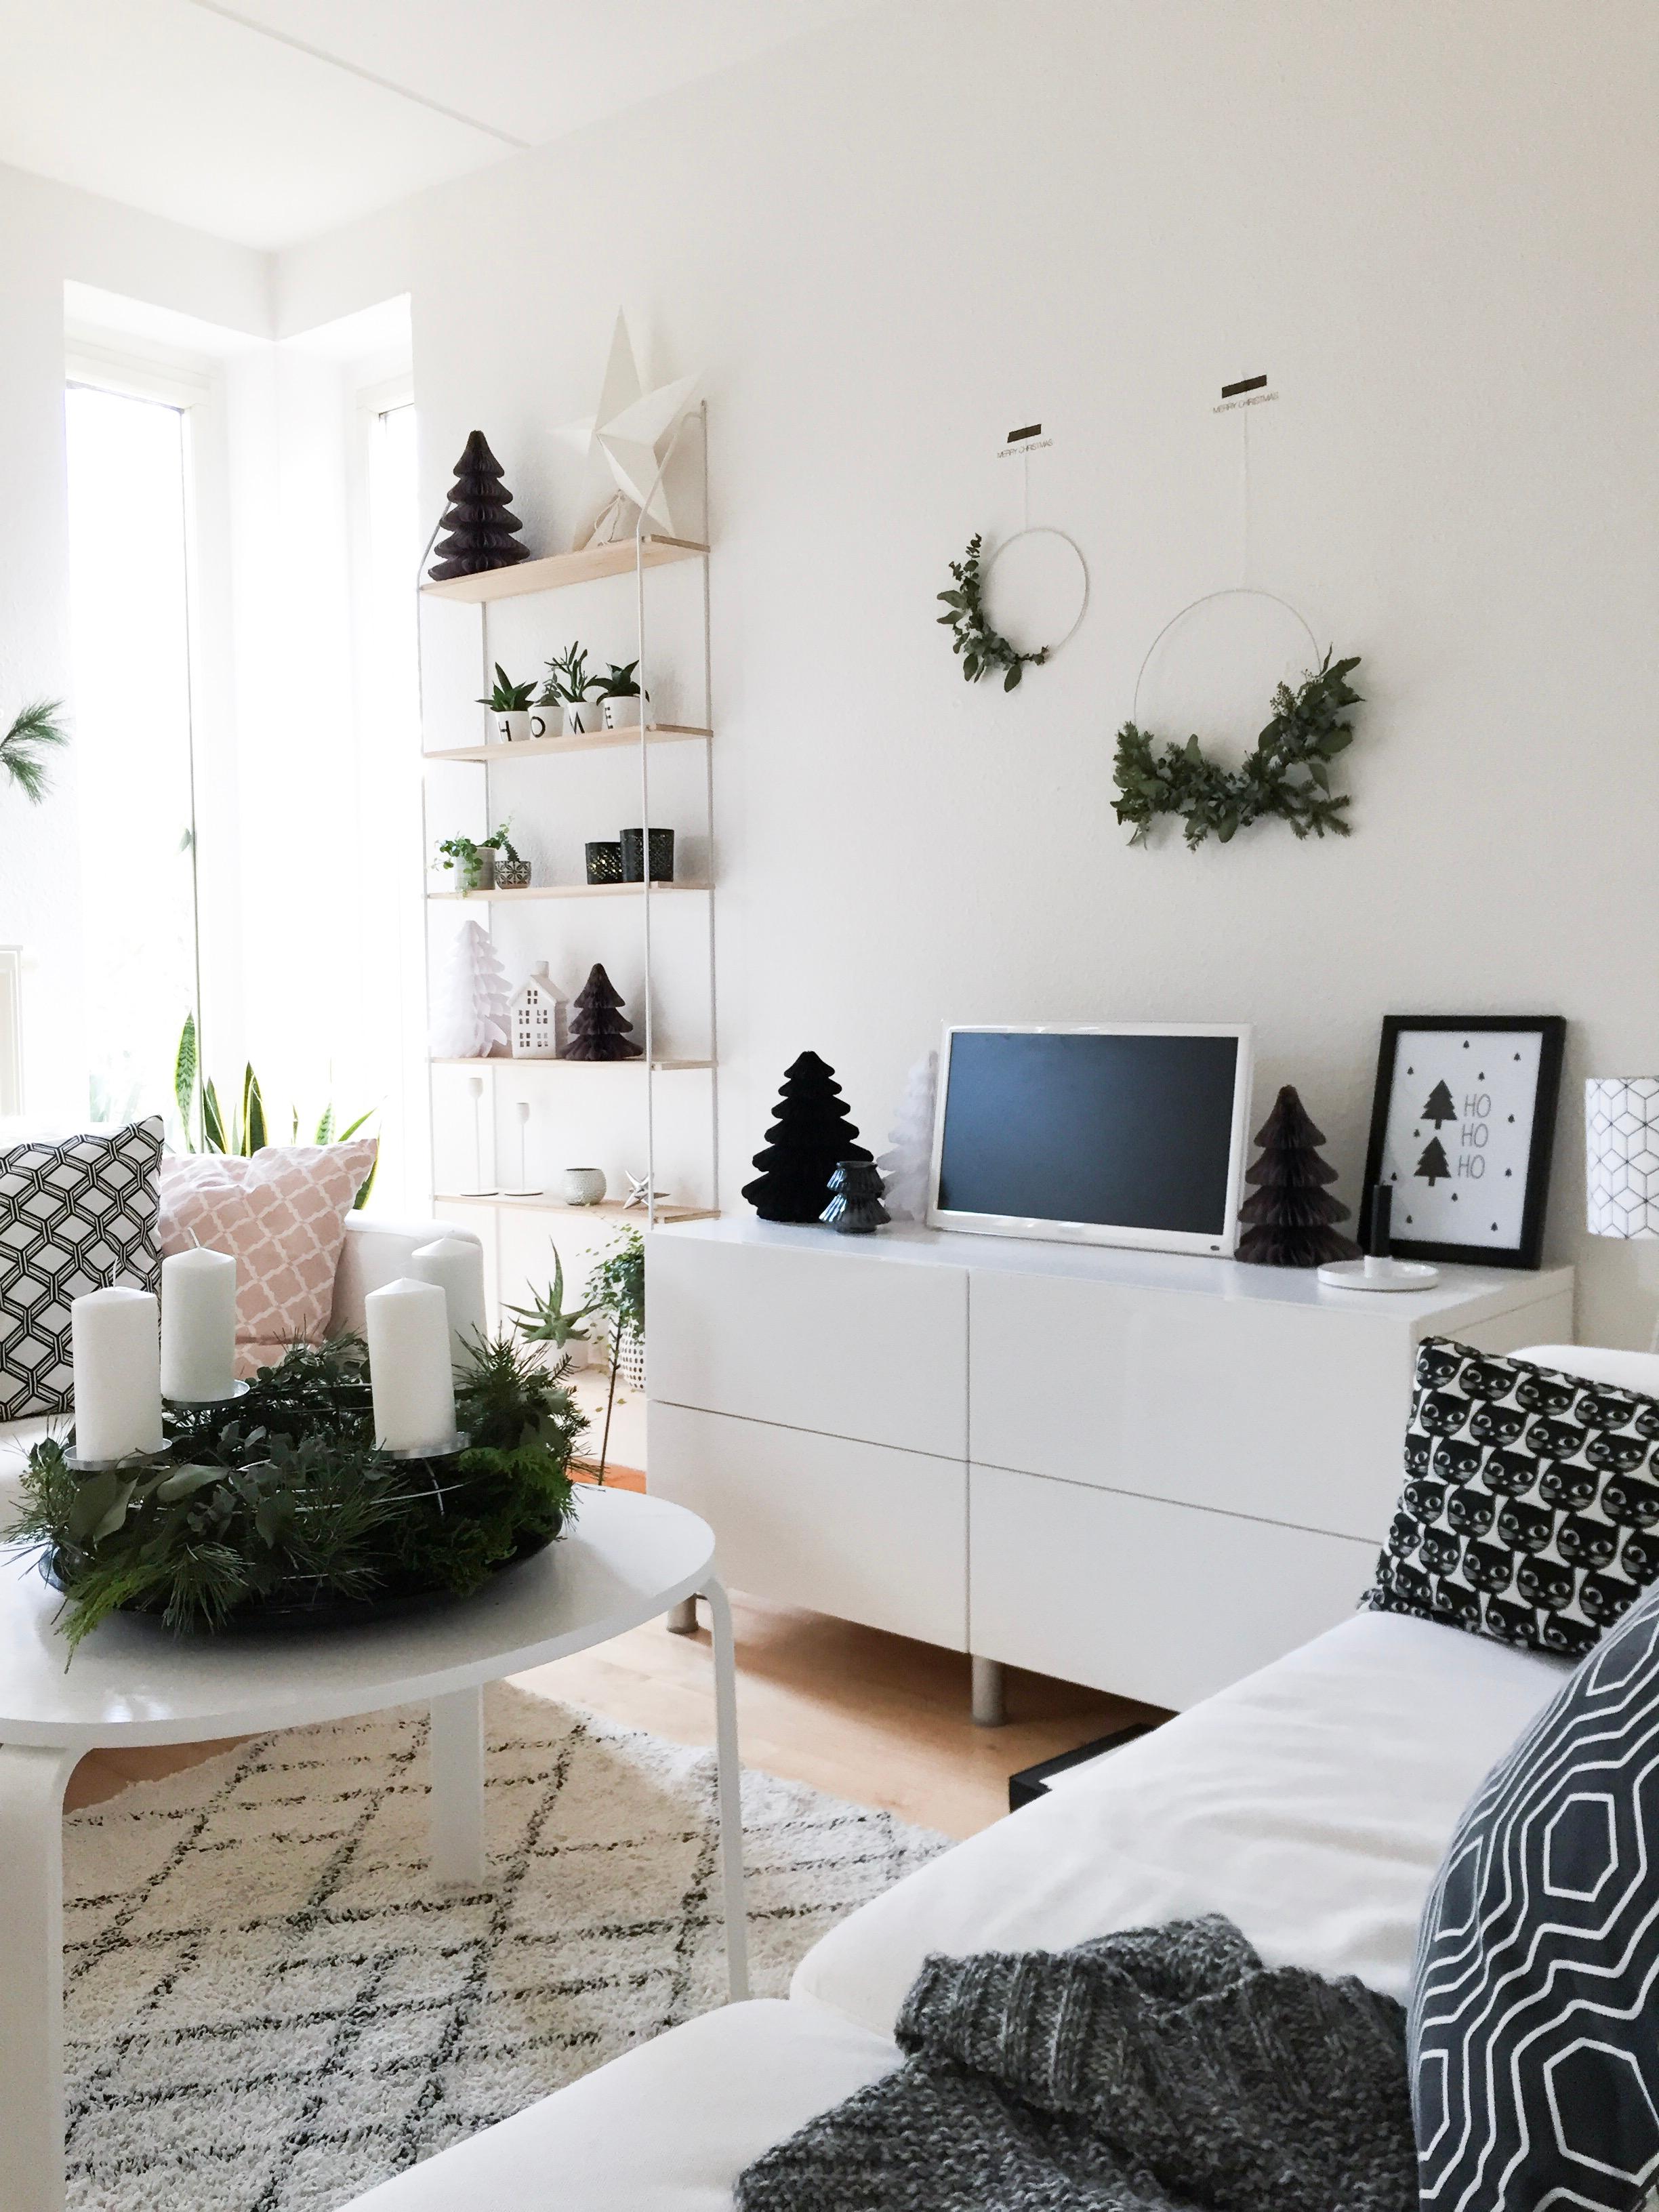 Home 🖤 Sweet 🖤 Home

#solebich #scandistyle #advent #nordic